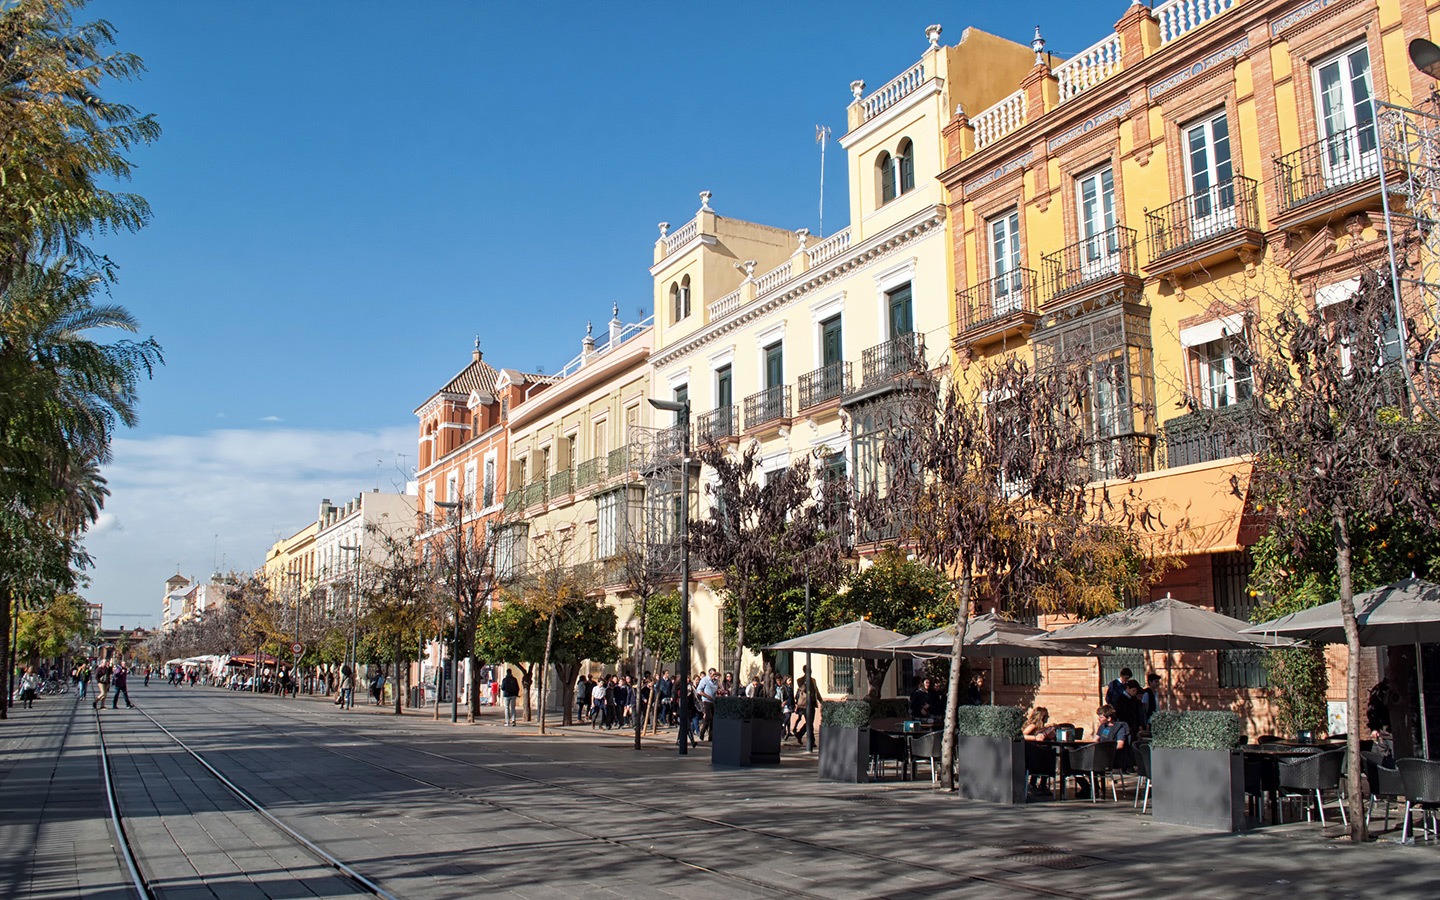 Orange trees lining the streets in Seville, Spain